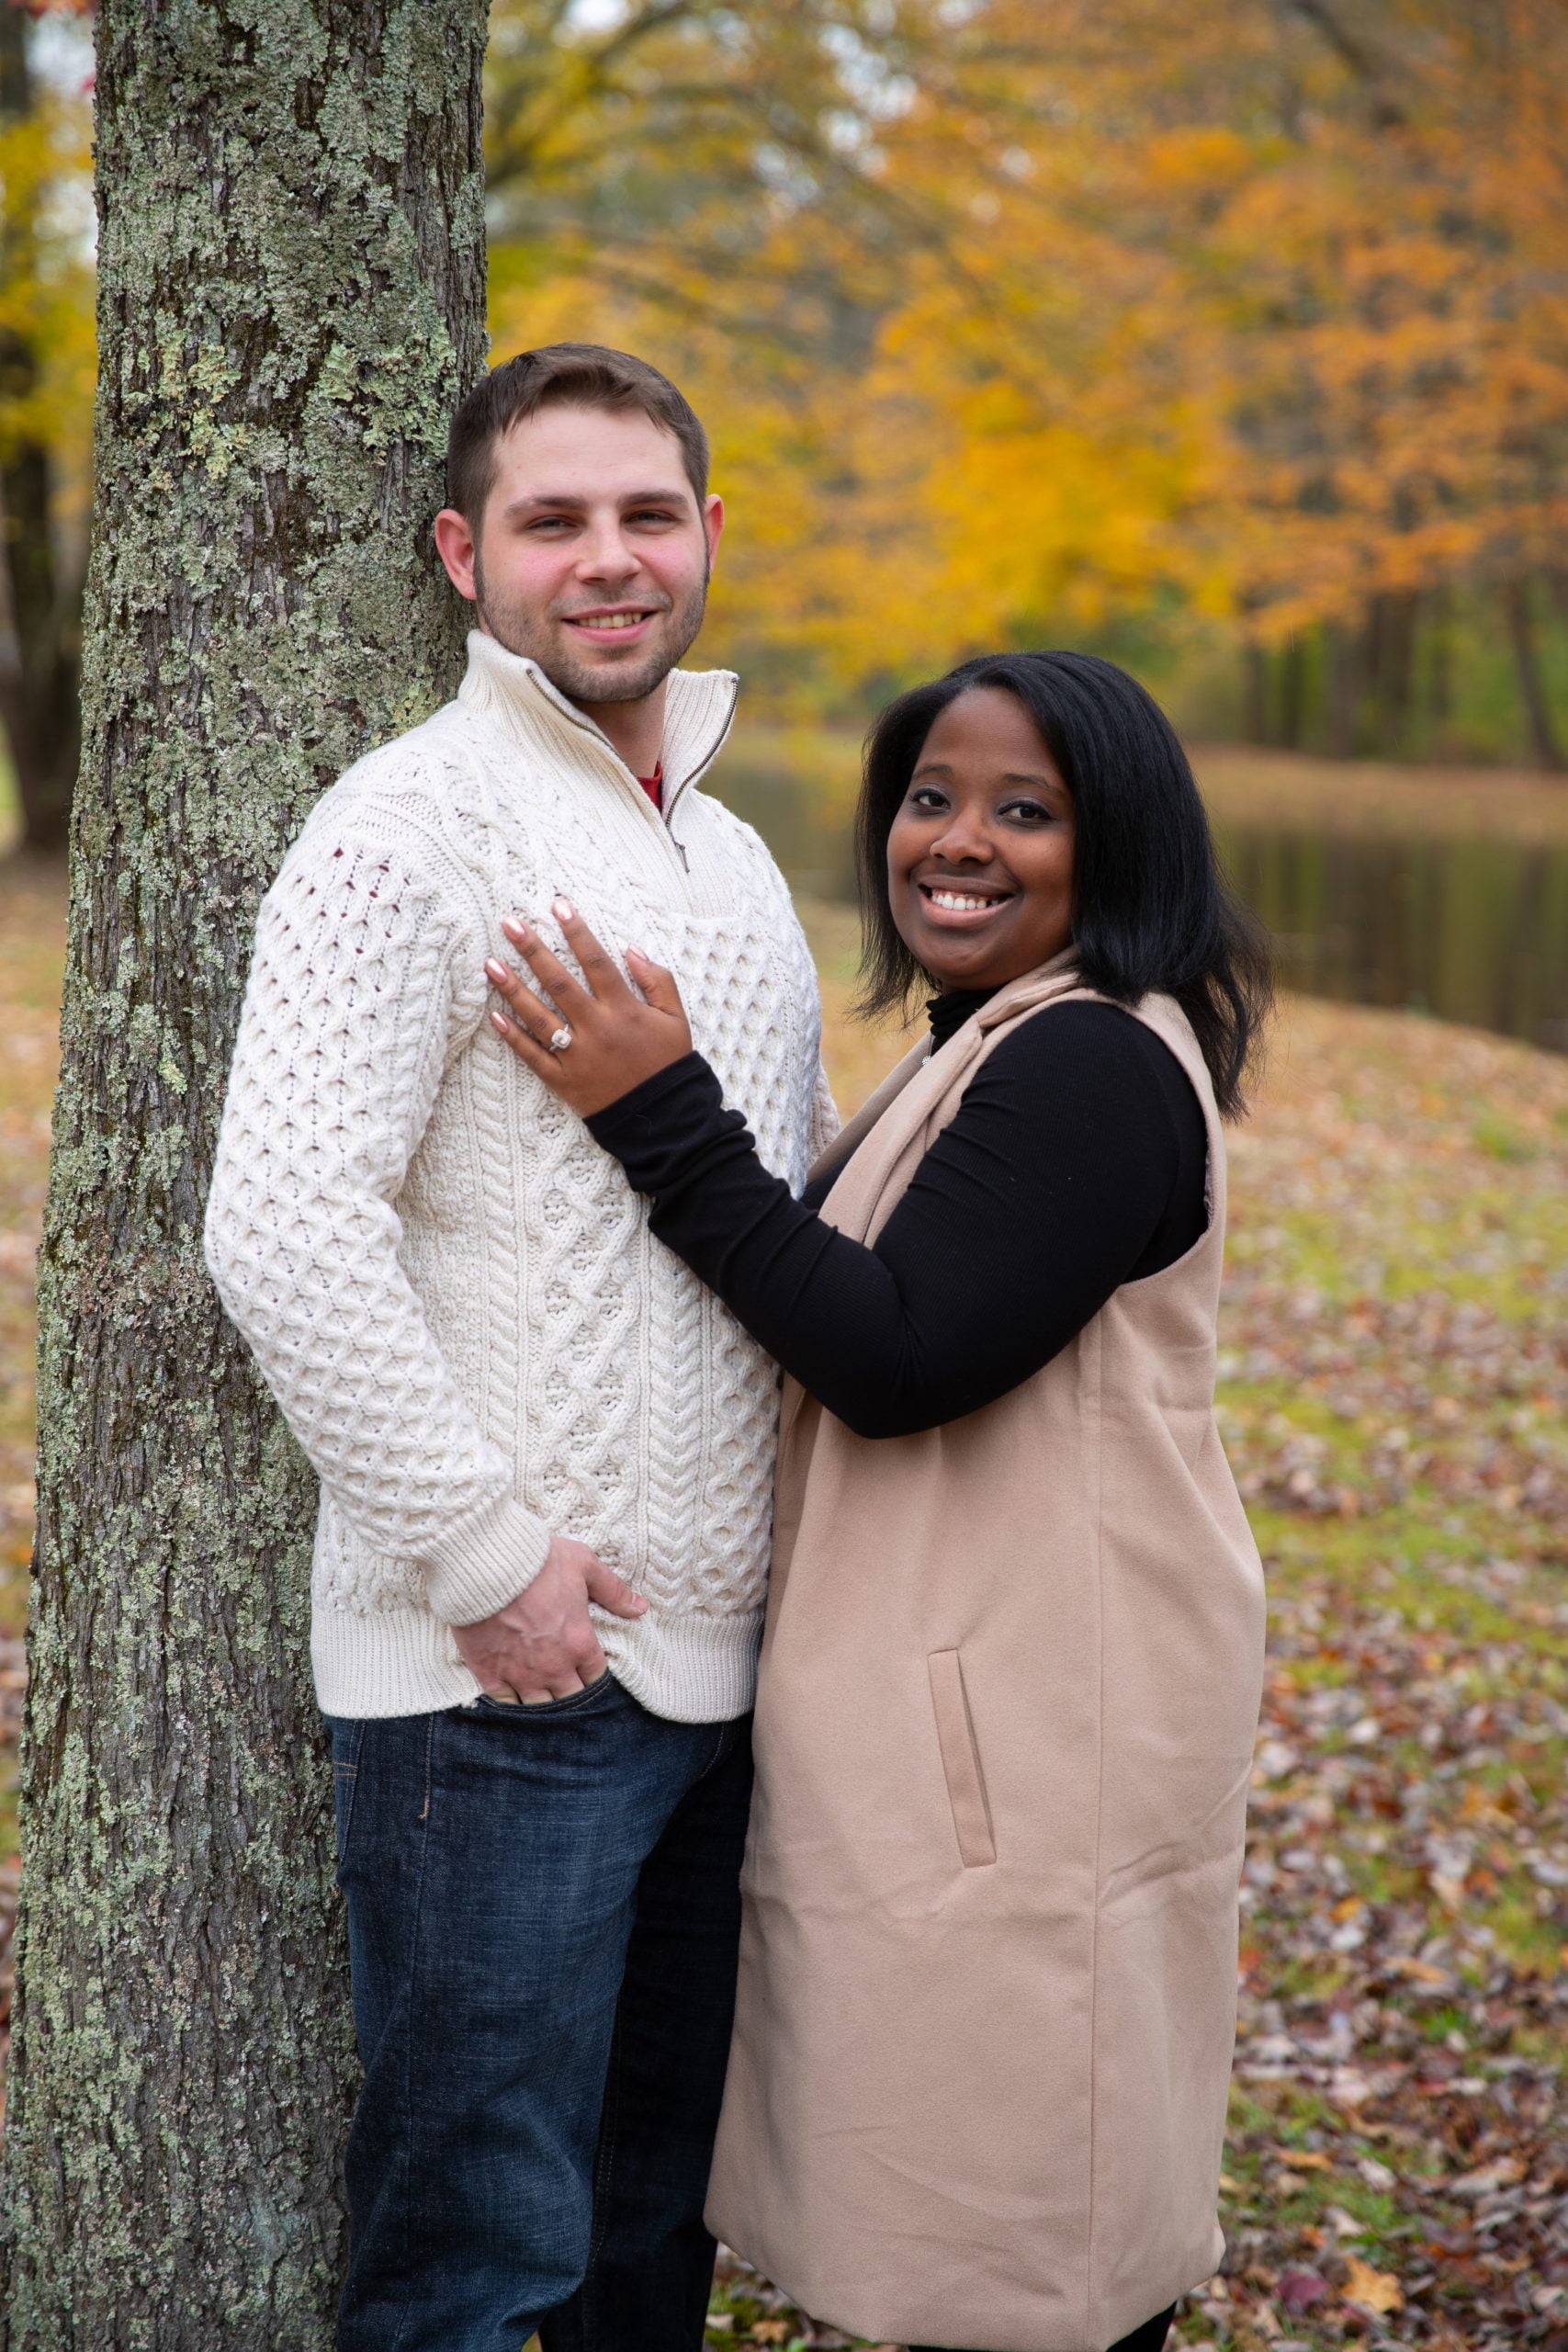 A man and woman are posing in front of a tree.